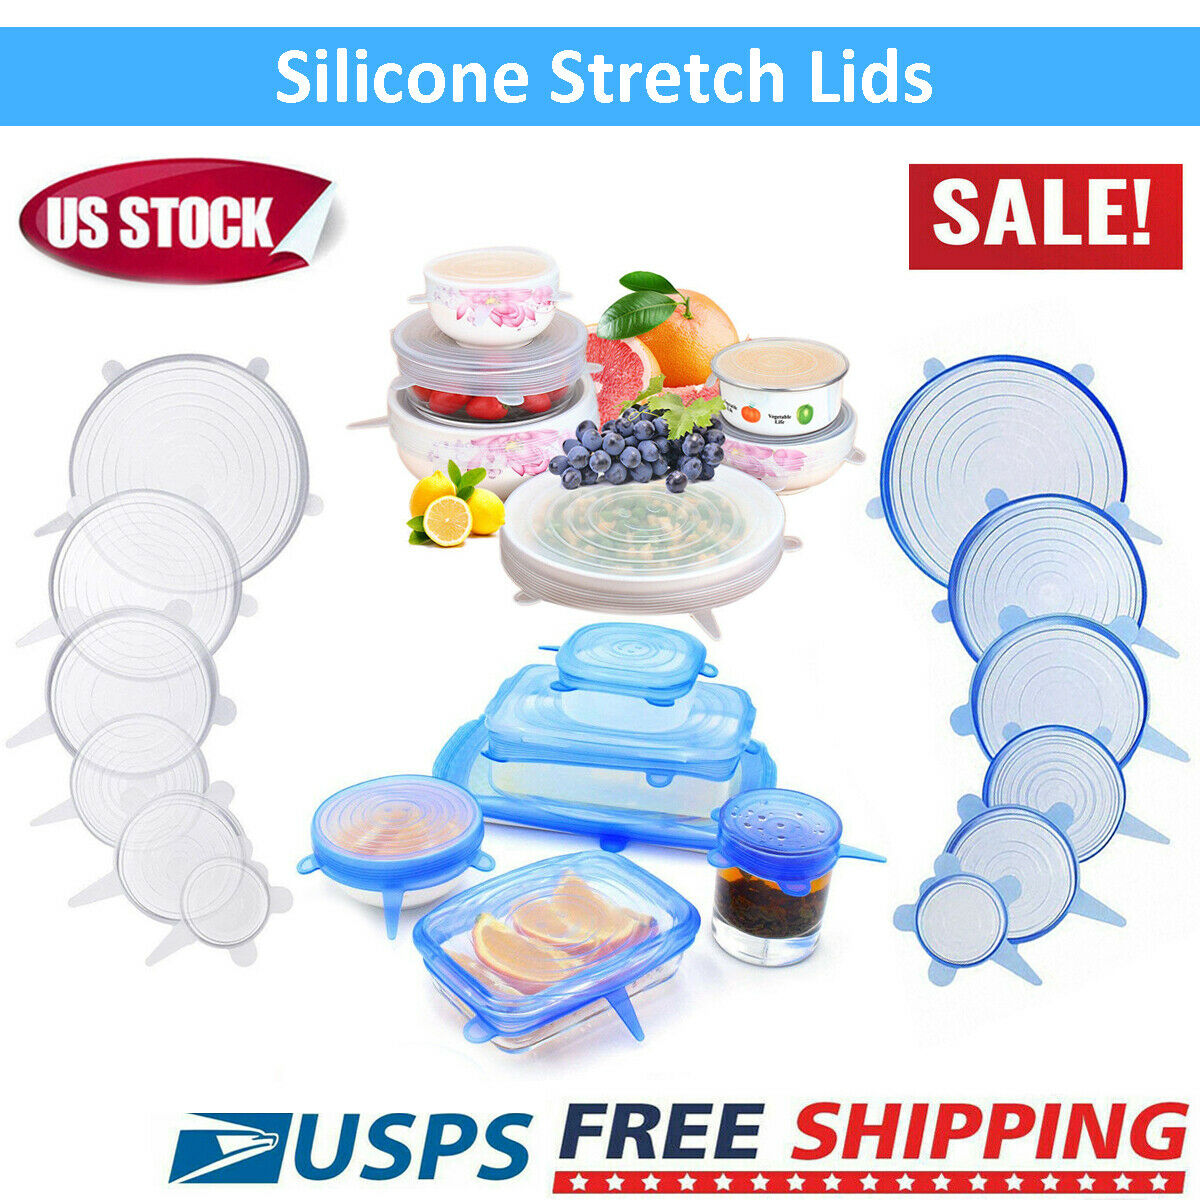 6x Reusable Silicone Stretch Lids Kitchen Bowl Cup Dish Covers Set -eco Friendly